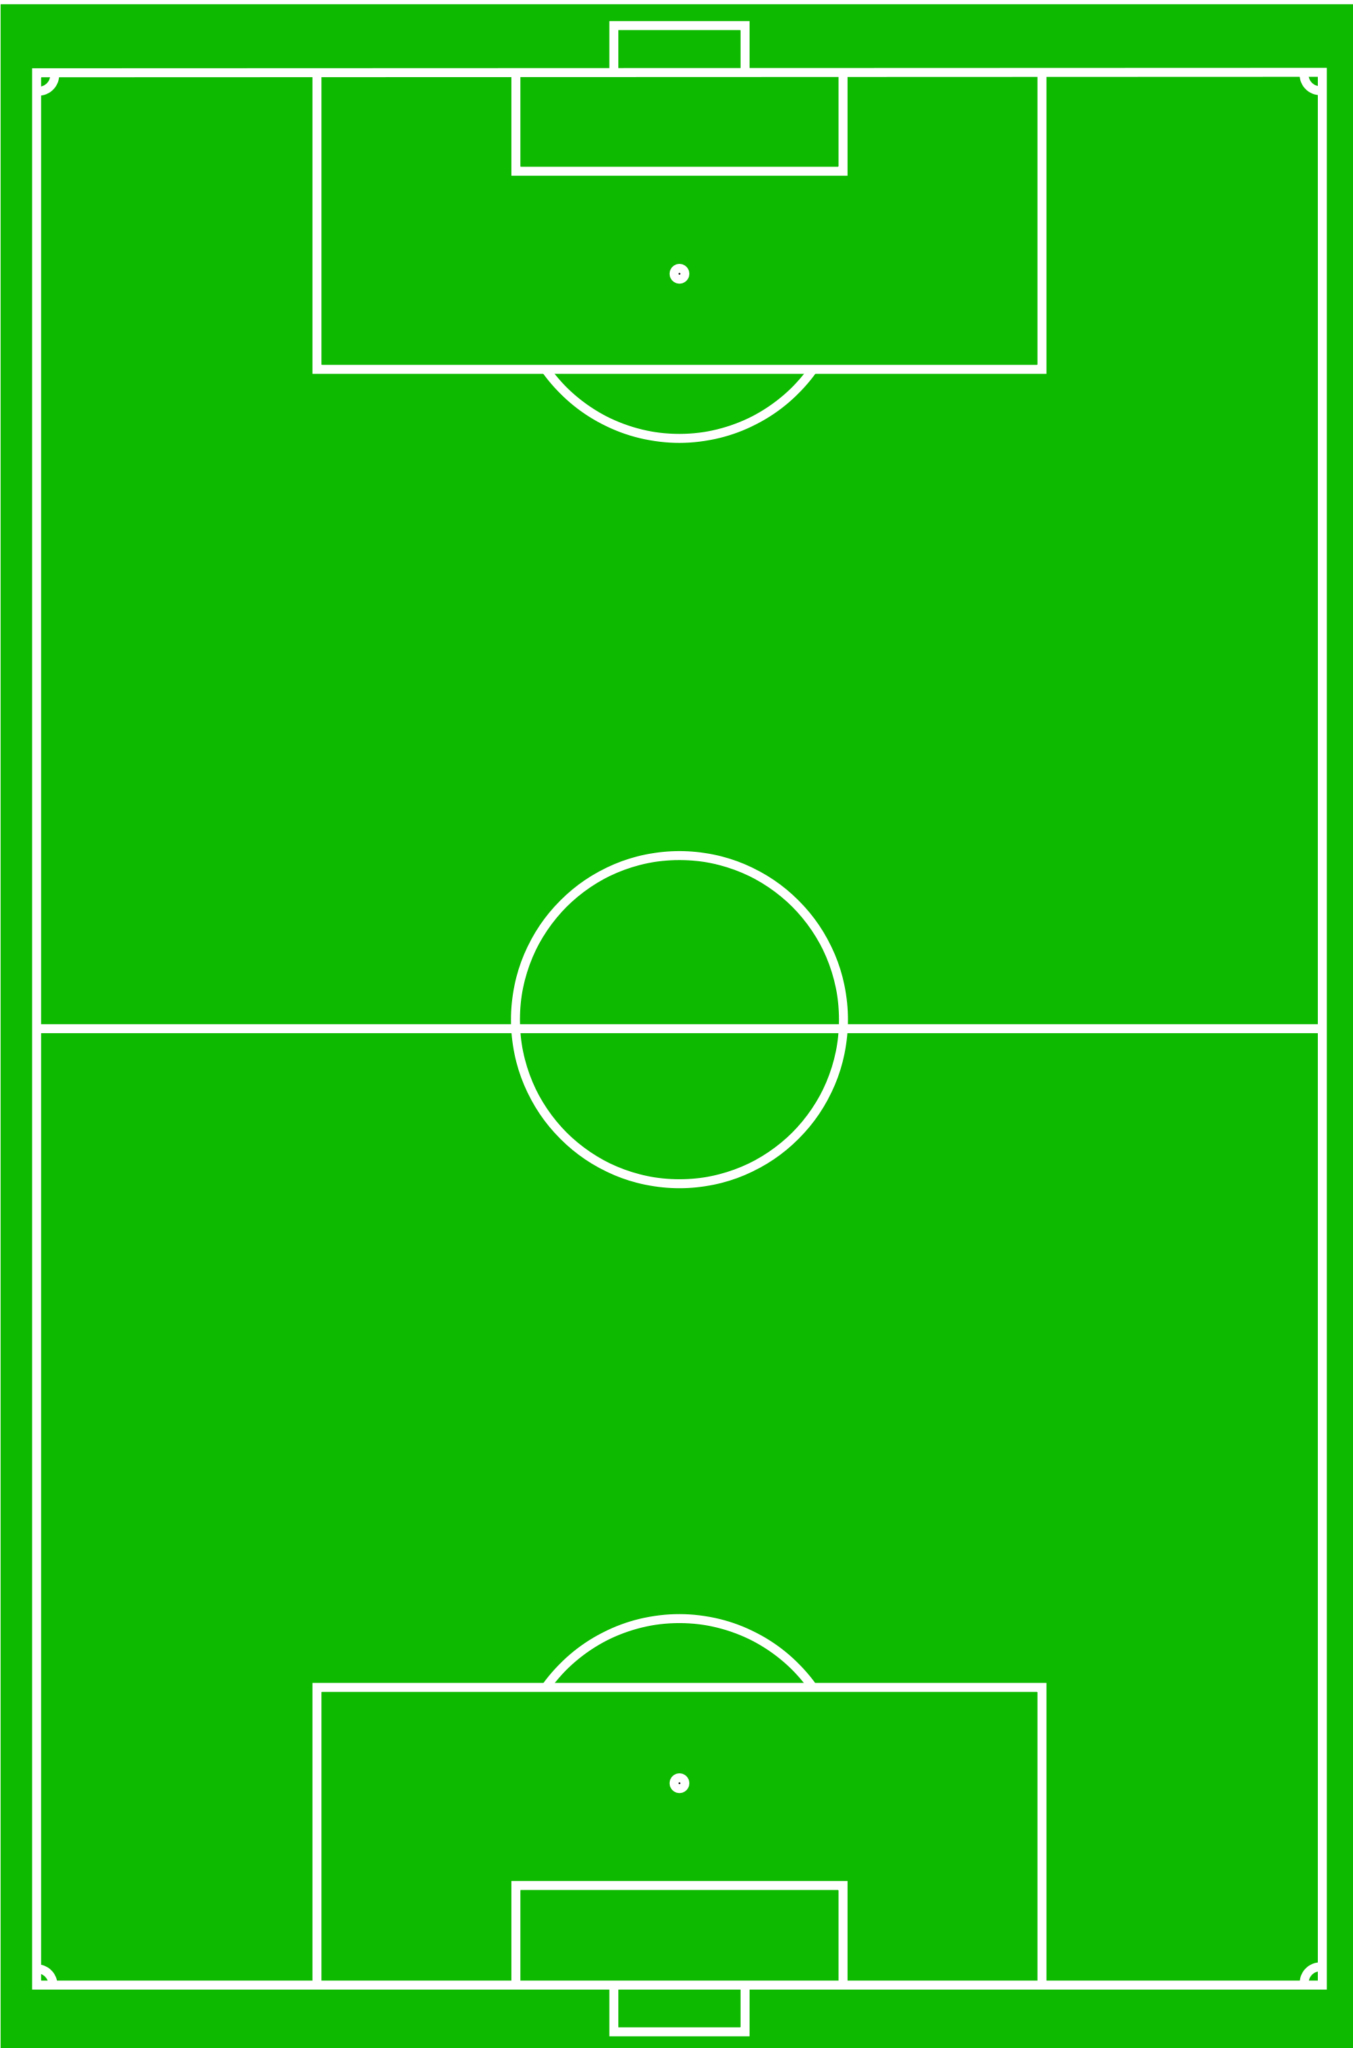 Library Of Football Field Border Clip Art Royalty Free within Blank Football Field Template